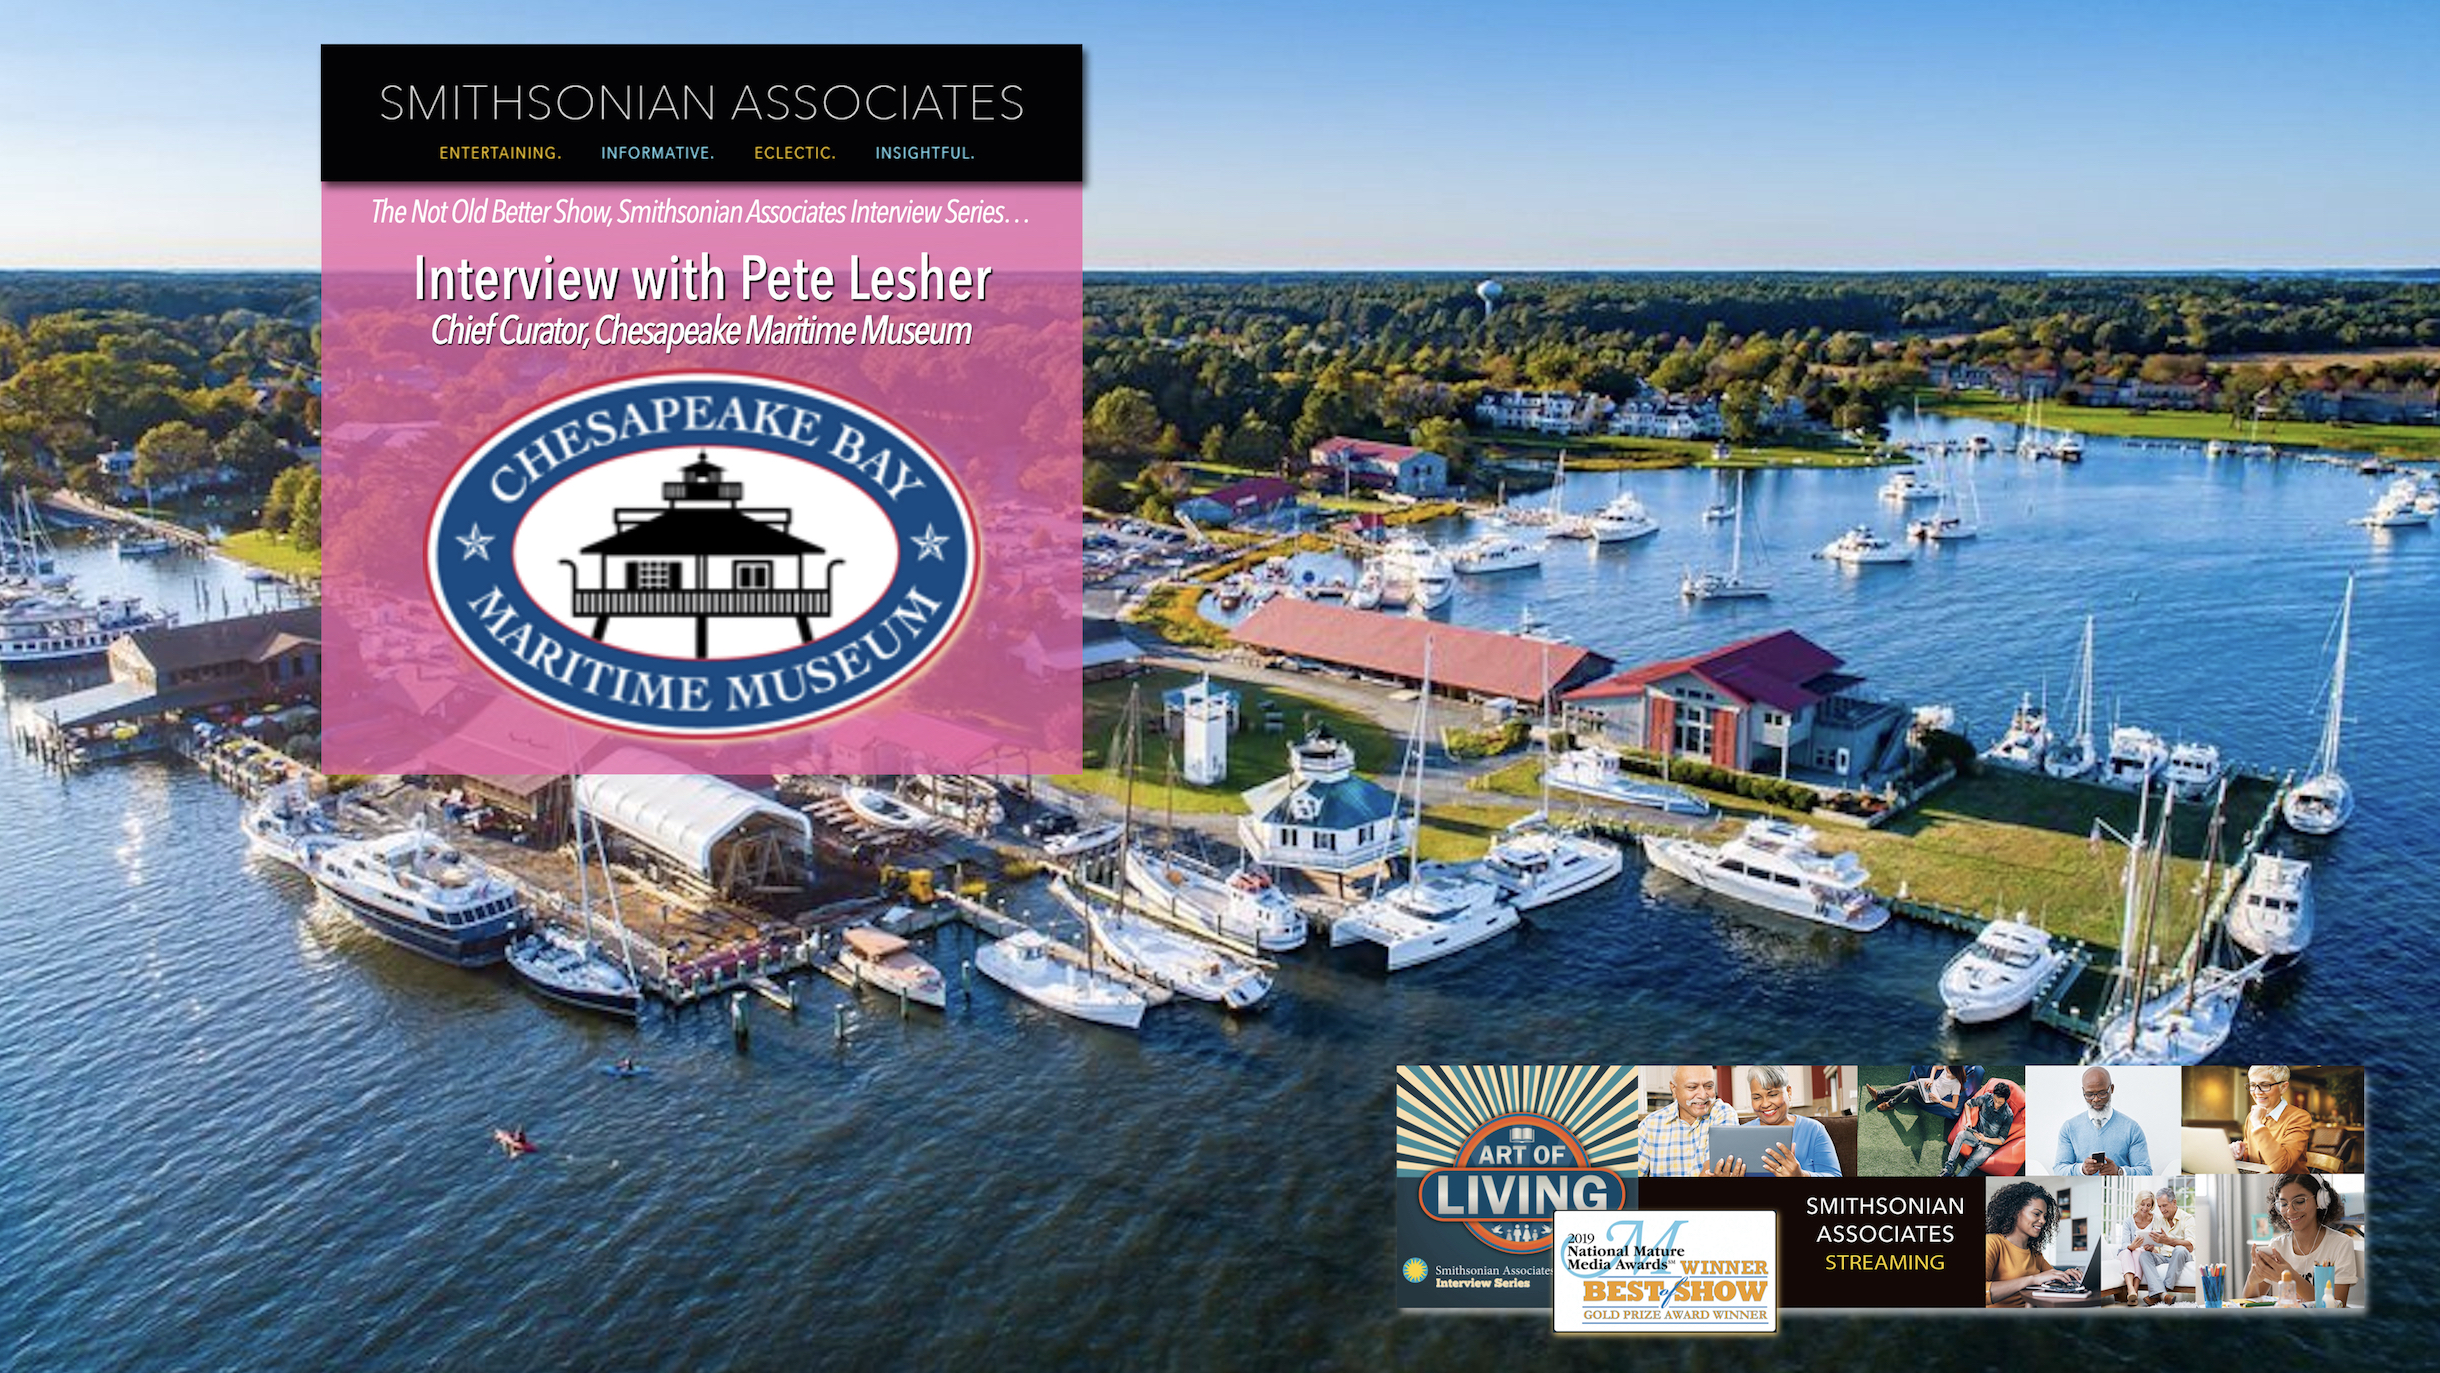 An Evening on the Bay with Chesapeake Bay Maritime Museum – Pete Lesher